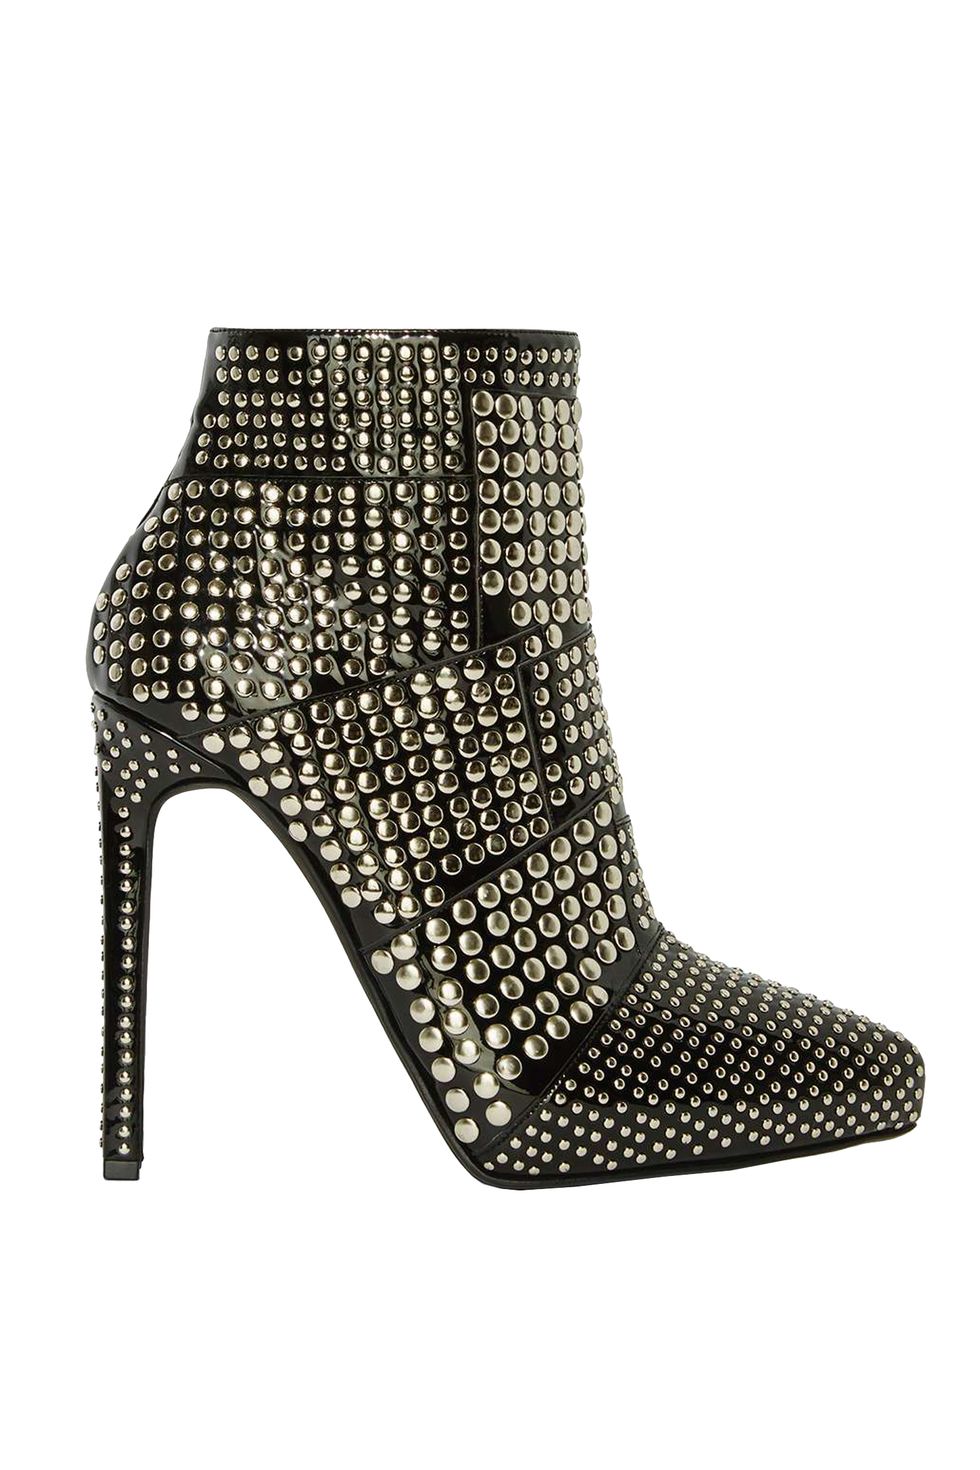 <p>That classic frock's best friend? A stylish pair of studded high-heel boots. <em>Jeffery Campbell Gauntlet Patent Leather Bootie, $320, </em><a href="http://www.nastygal.com/shoes-boots/jeffrey-campbell-gauntlet-patent-leather-bootie" target="_blank"><em>nastygal.com</em></a></p>